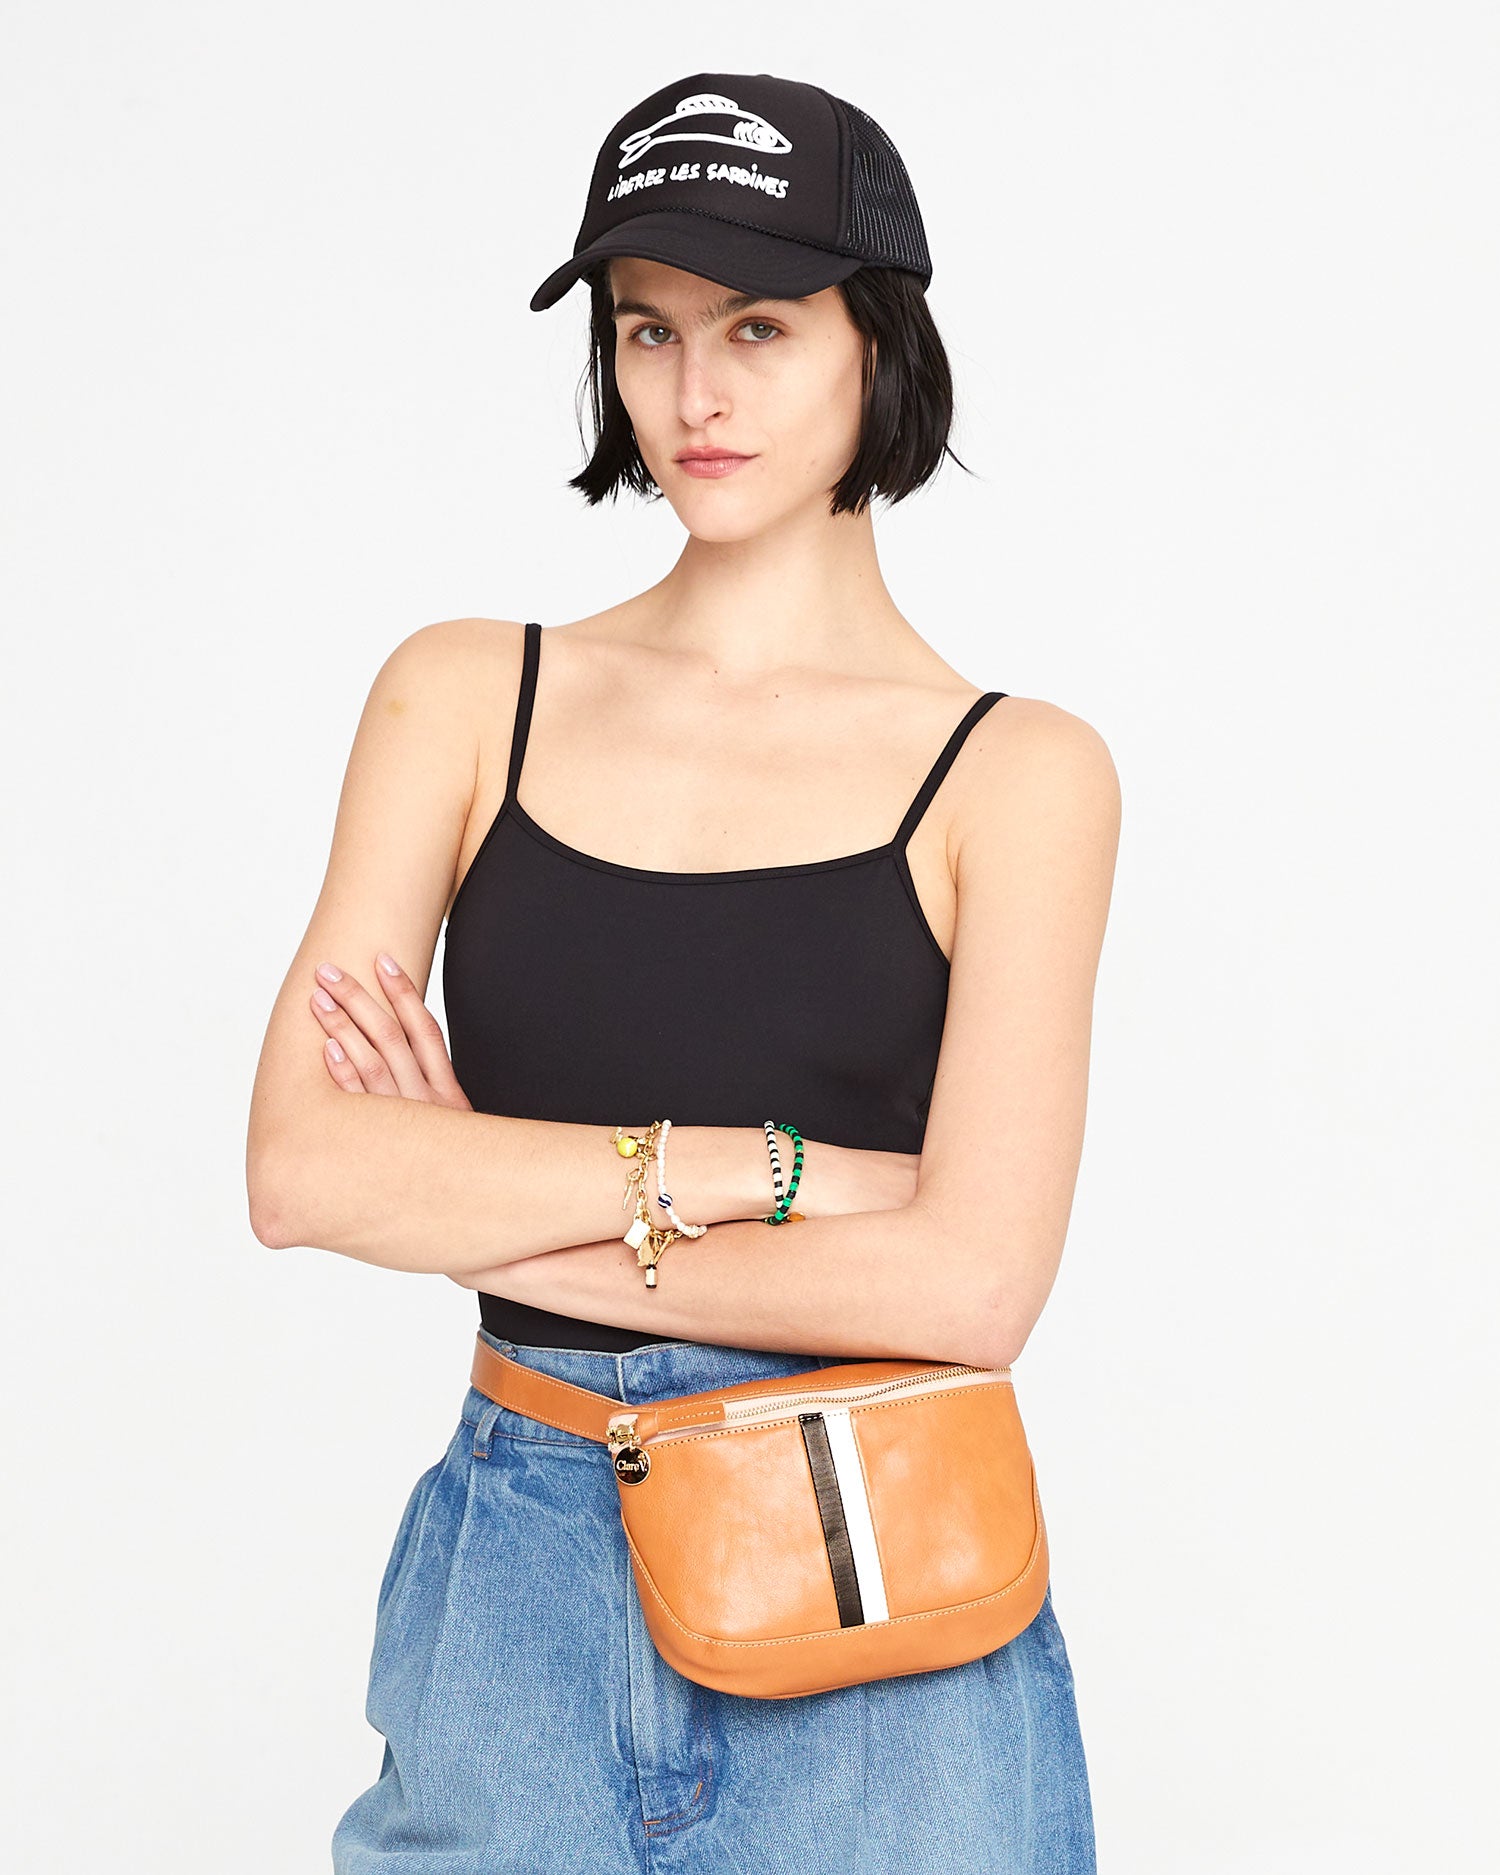 athena wearing the Black with Liberez les Sardines Trucker hat with the natural fanny pack